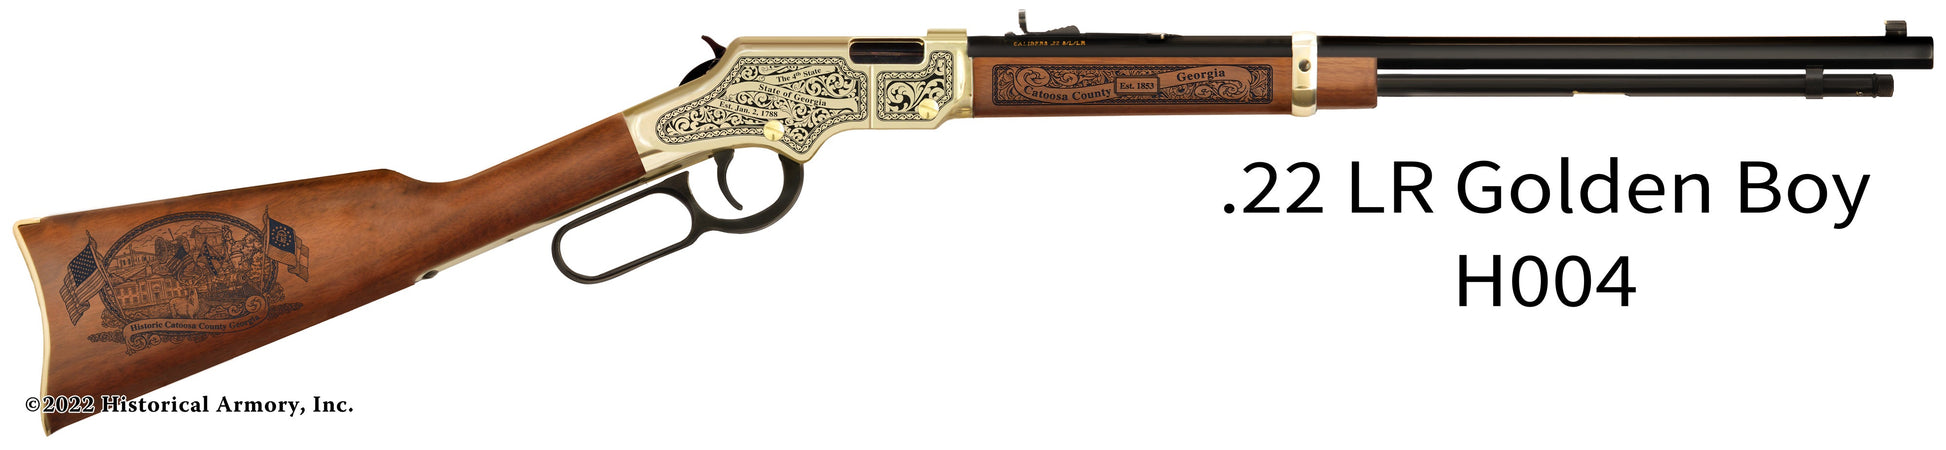 Catoosa County Georgia Engraved Henry Golden Boy Rifle